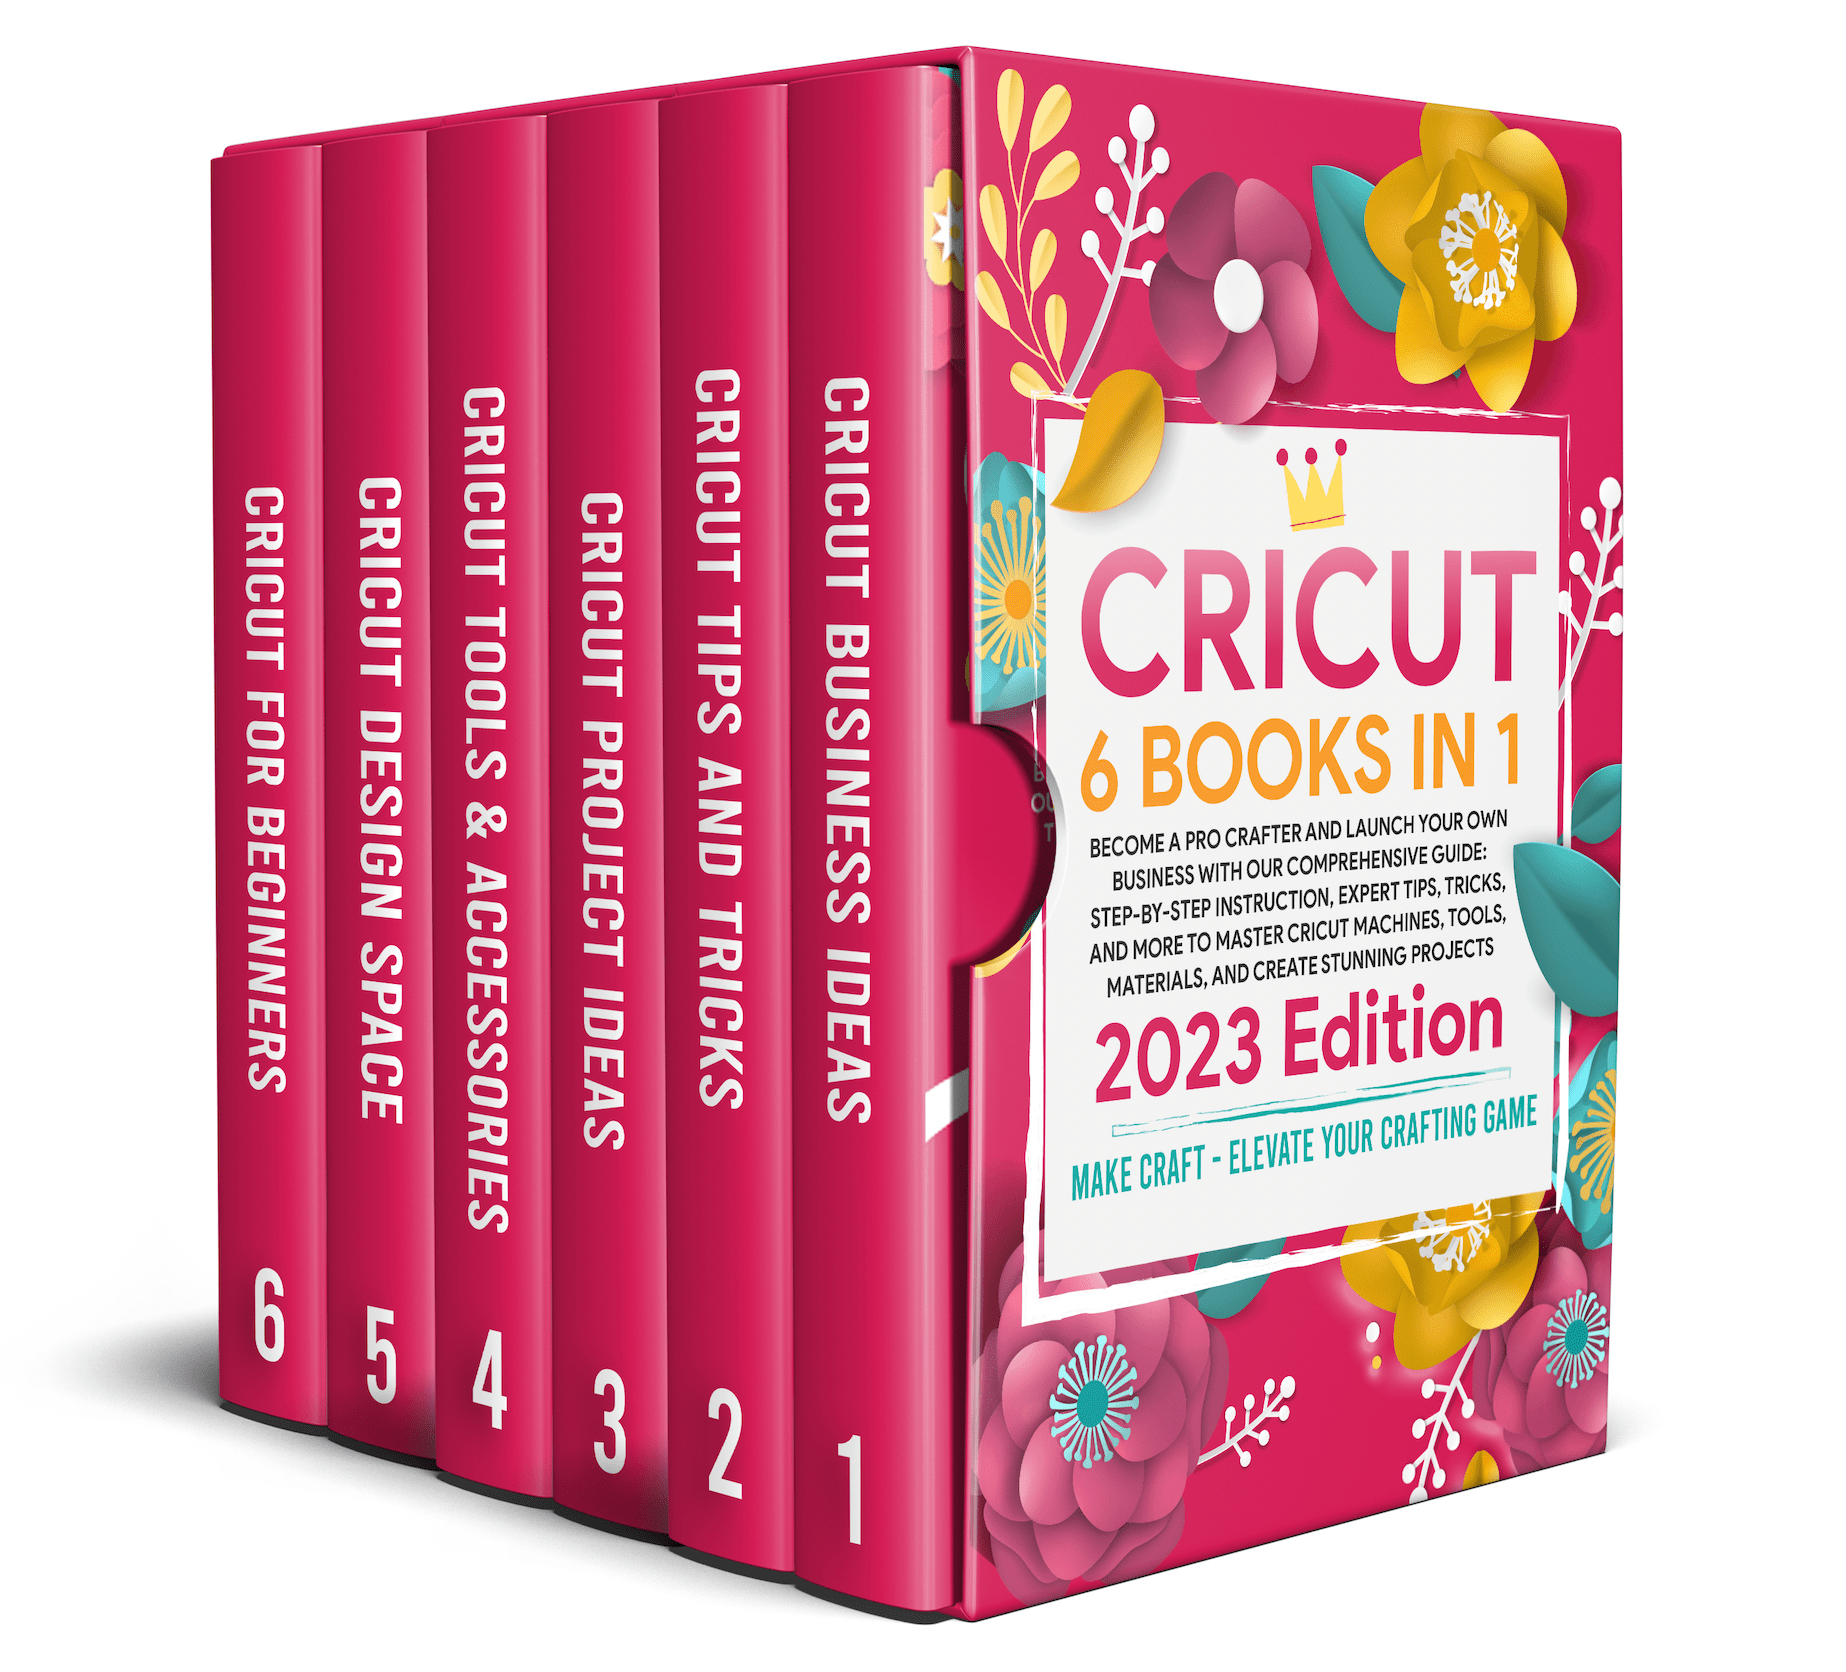 Cricut: 5 Books in1 - The Complete Beginner's Guide to Mastering Cricut,  with Tips and Tricks to Create Your Profitable Project Ideas. The New  Cricut Bible 2023 That You Don't Find in